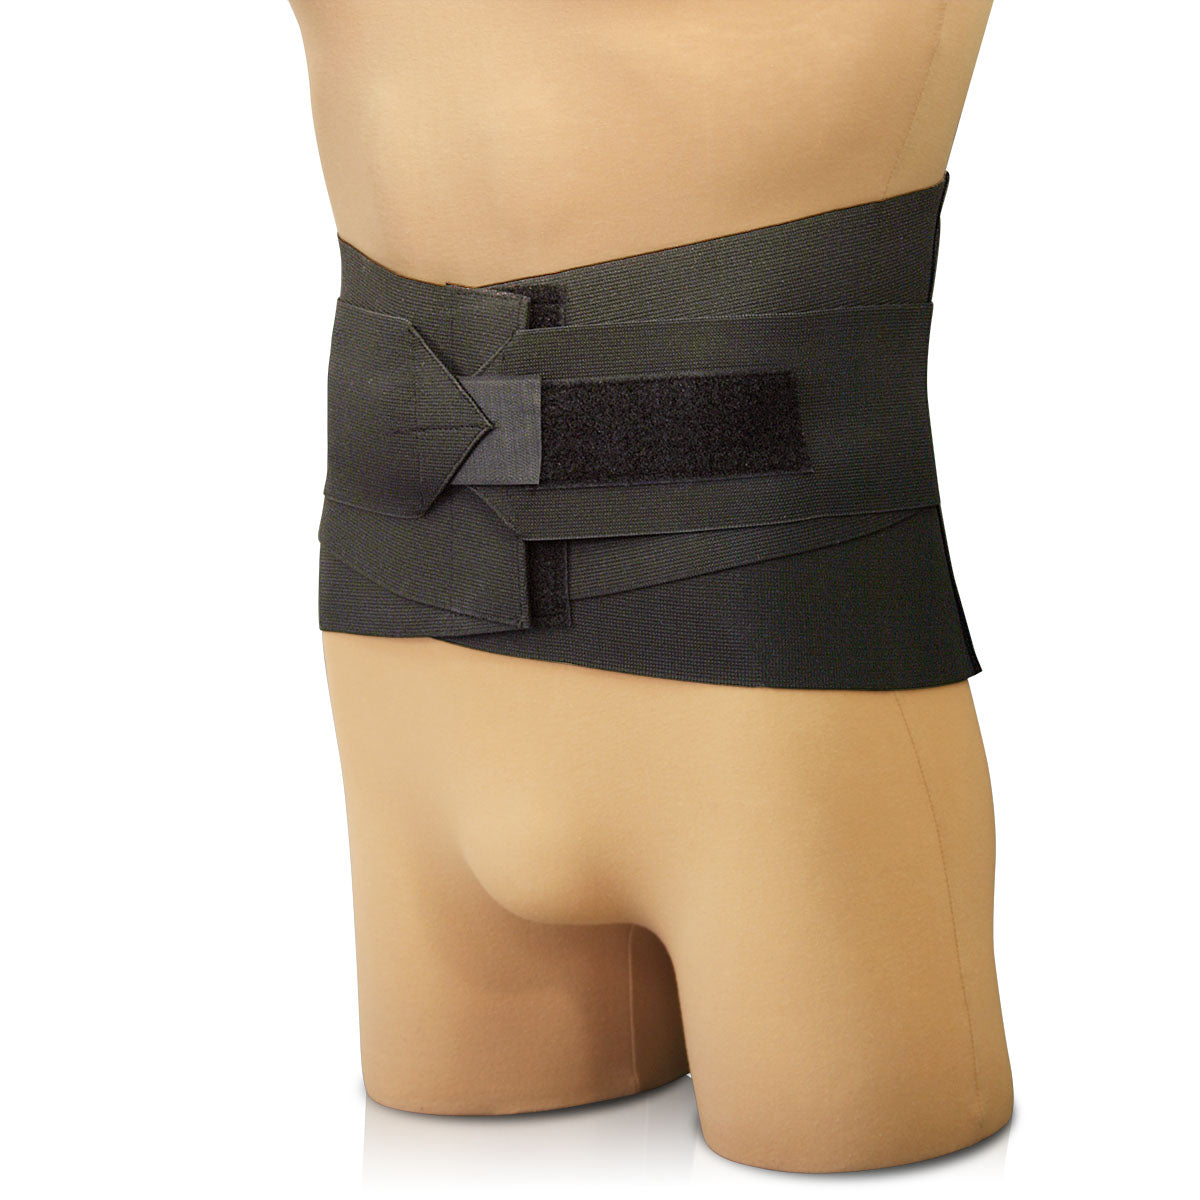 Lumbar Sacral Support DCSO, Small, Fits Waist 26" - 30"